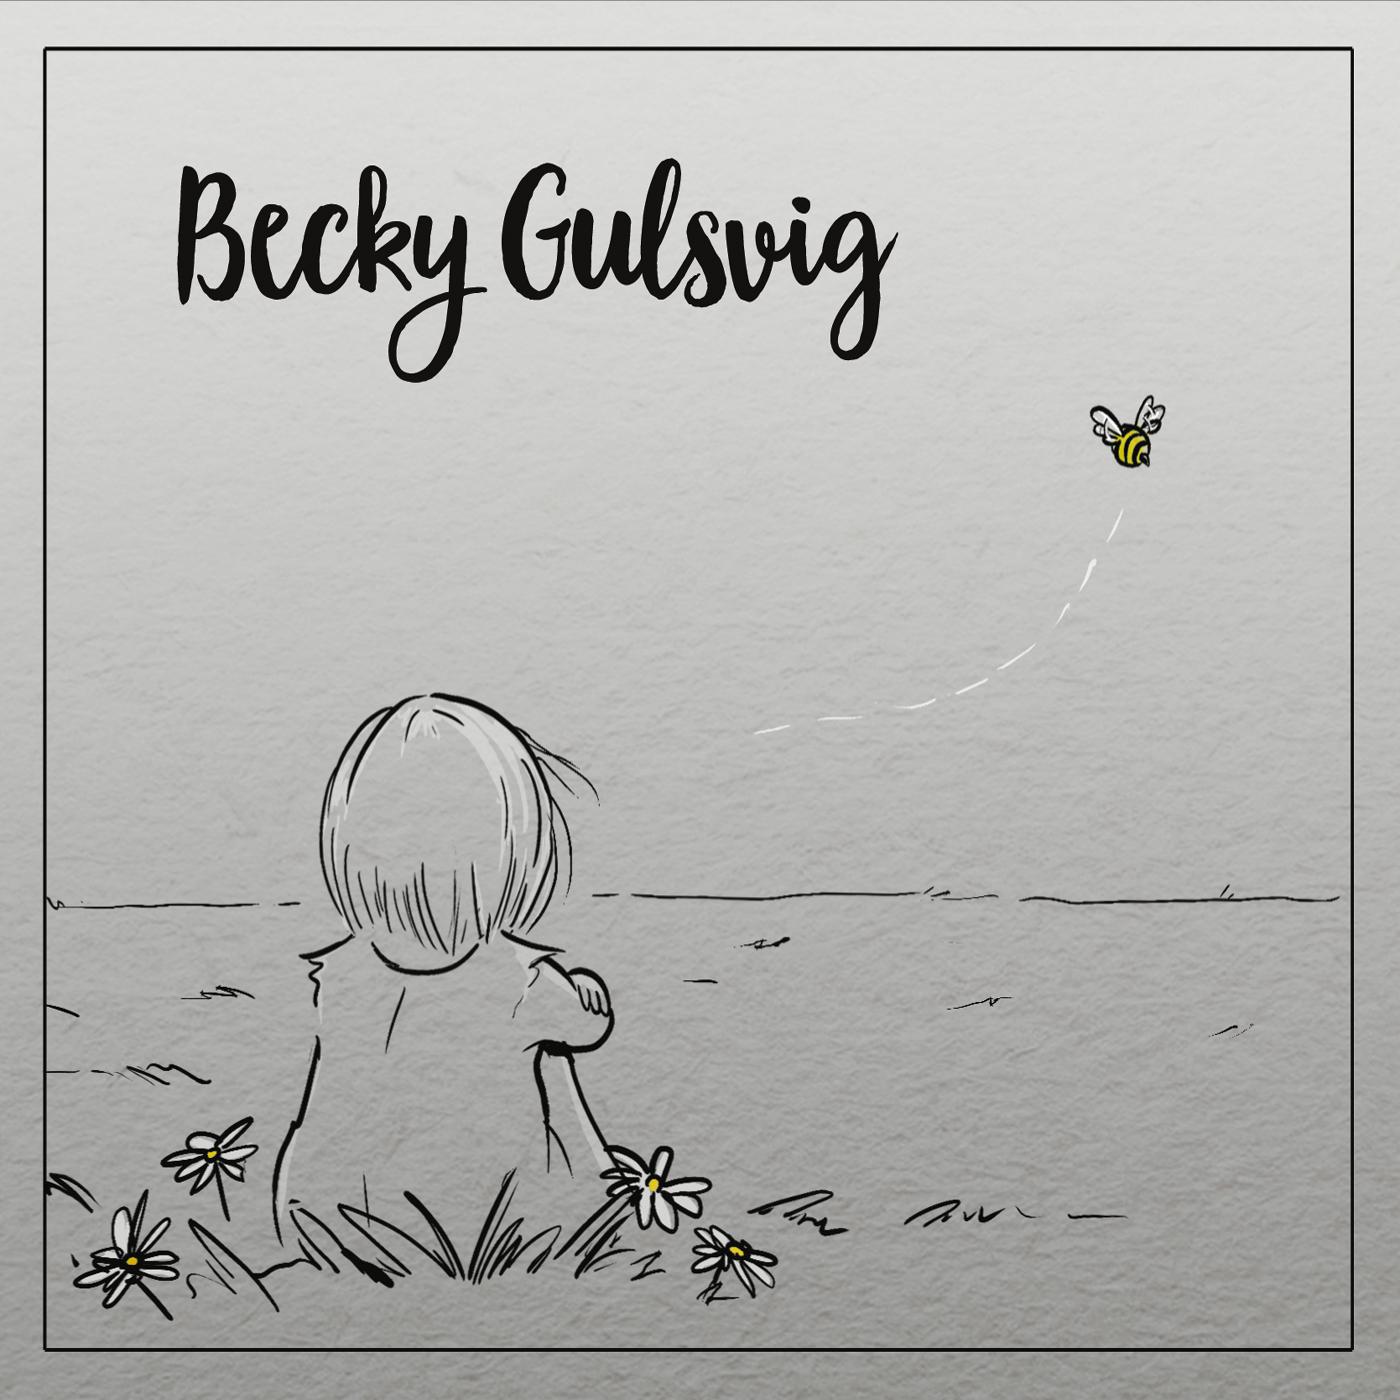 Becky Gulsvig - Smile Medley: You're Never Fully Dressed Without a Smile / Smile / Wink and a Smile